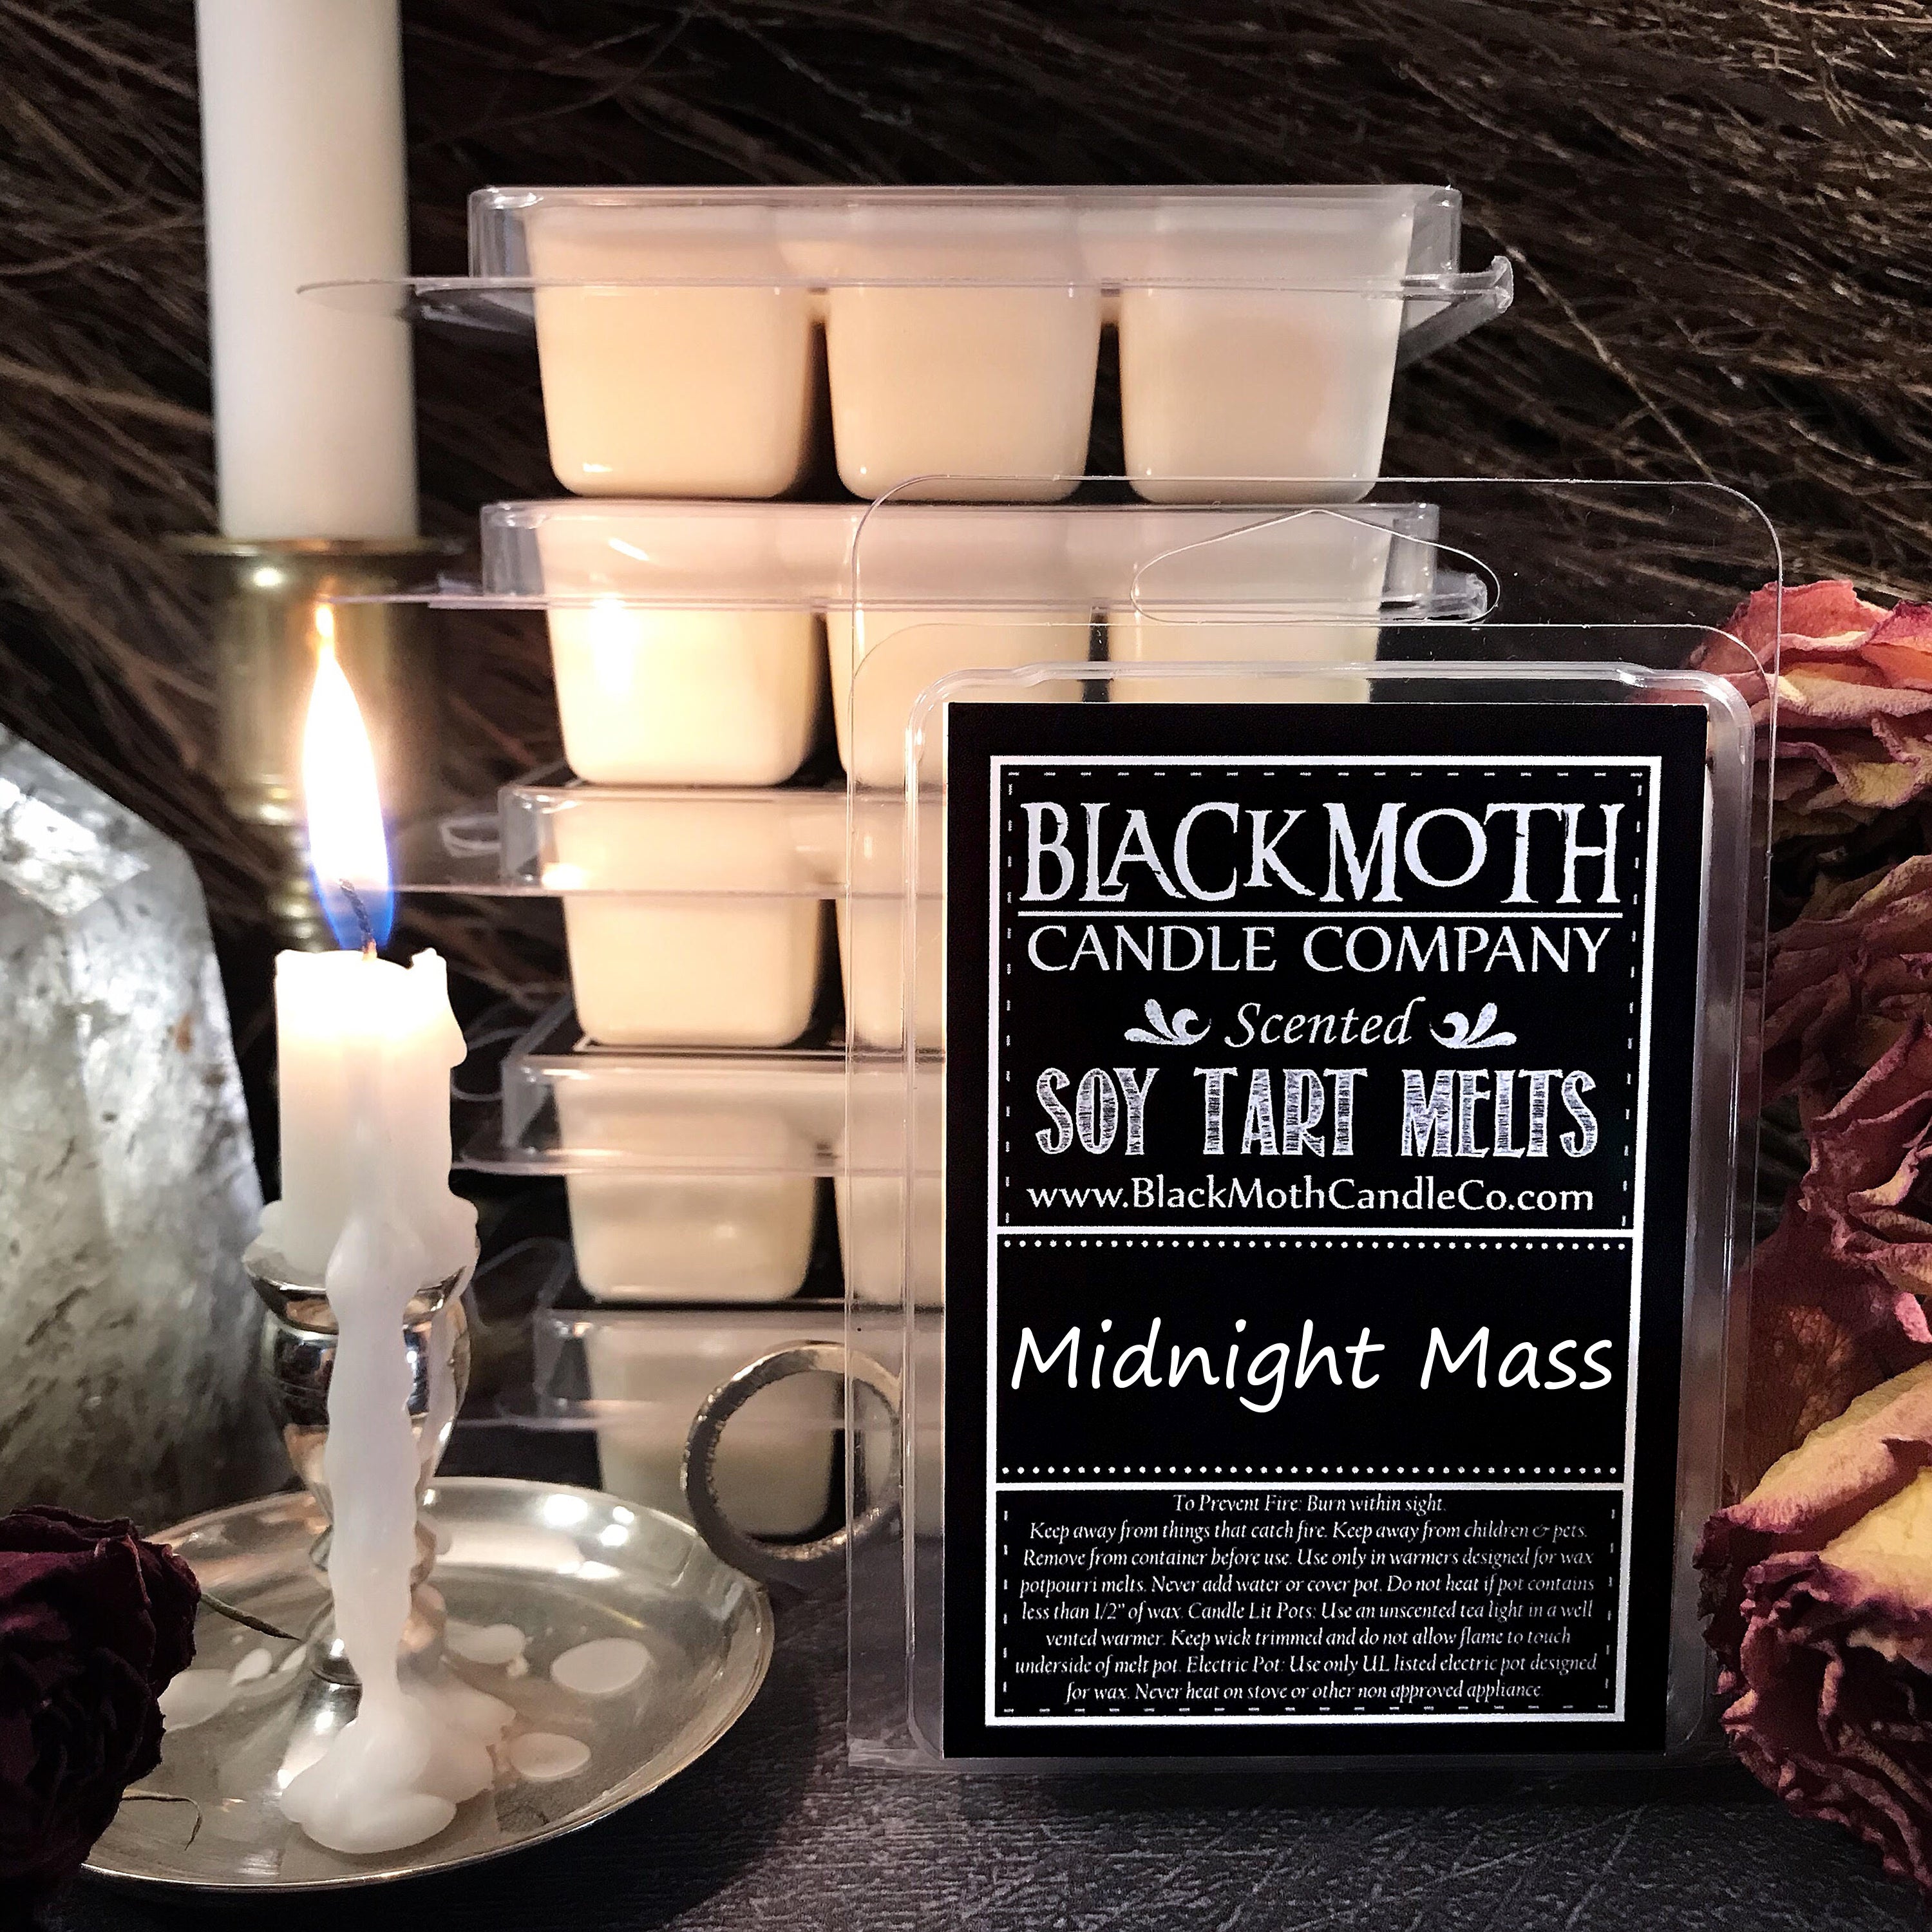 Frankincense & Myrrh Scented Soy Candle - Aroma Flame Candles